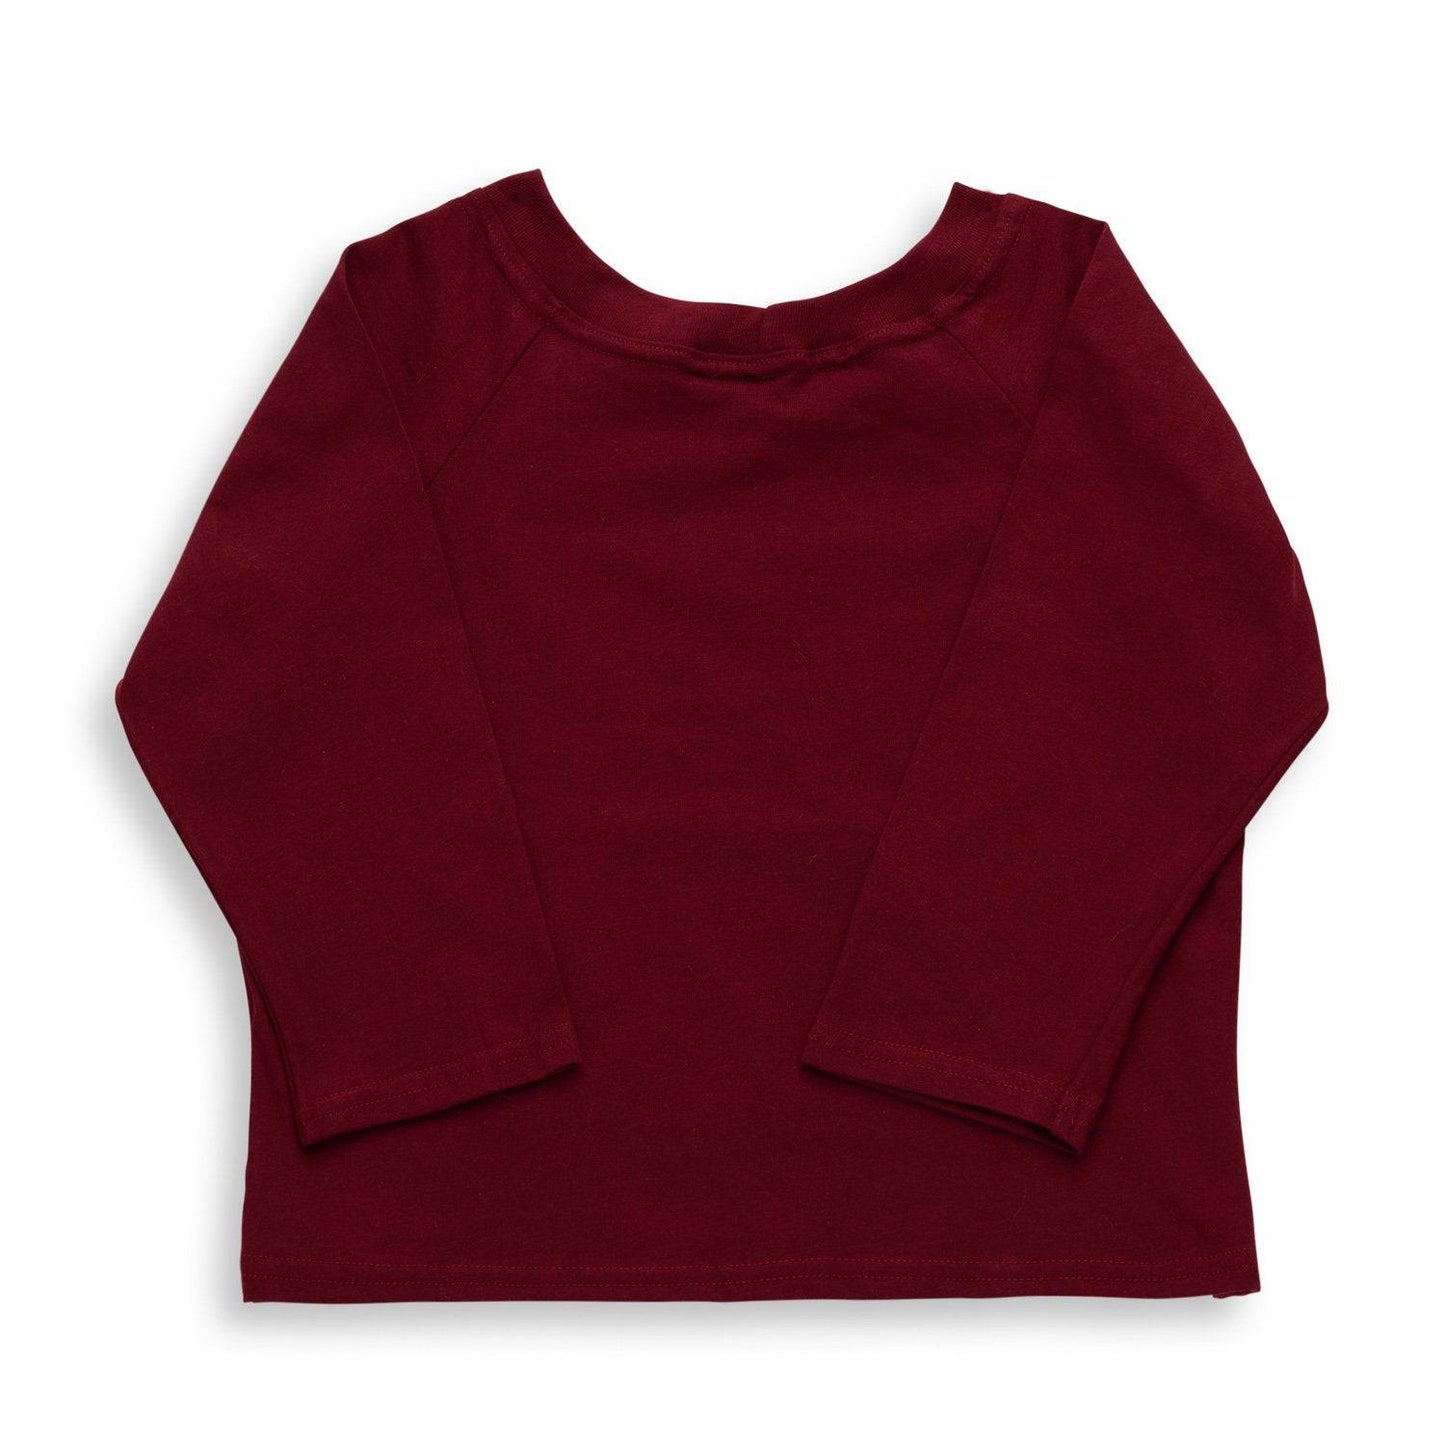 The Boat T-Shirts (boys - maroon) - CooCootales